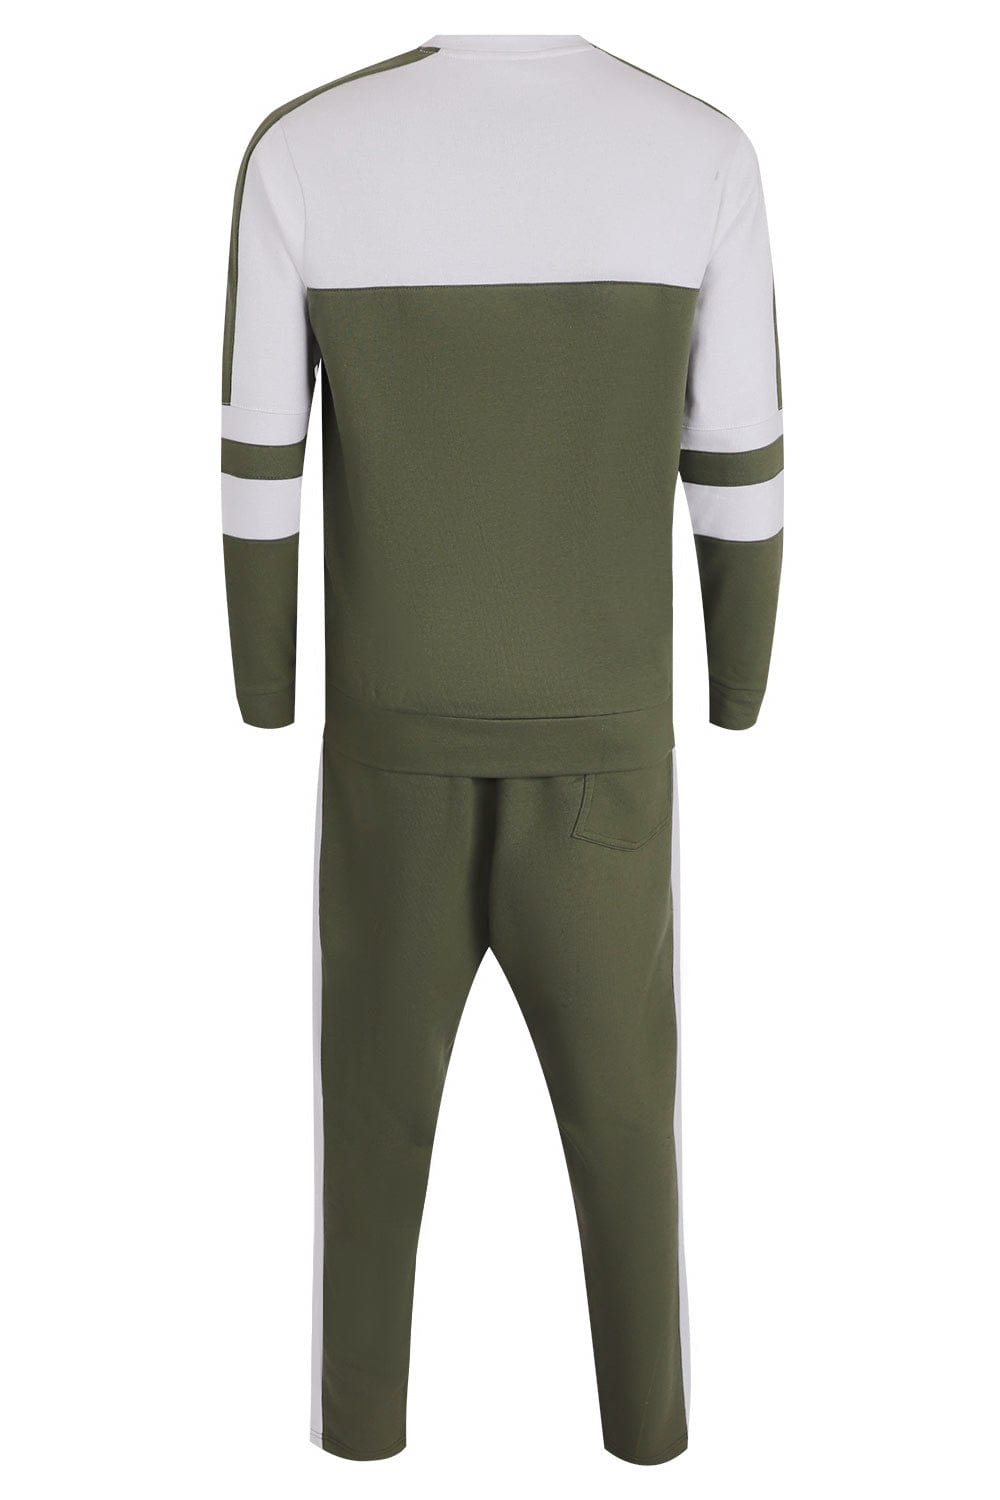 Hope Not Out by Shahid Afridi Men Athleisure Set Fashion Athleisure Set with Cut and Sew Panels